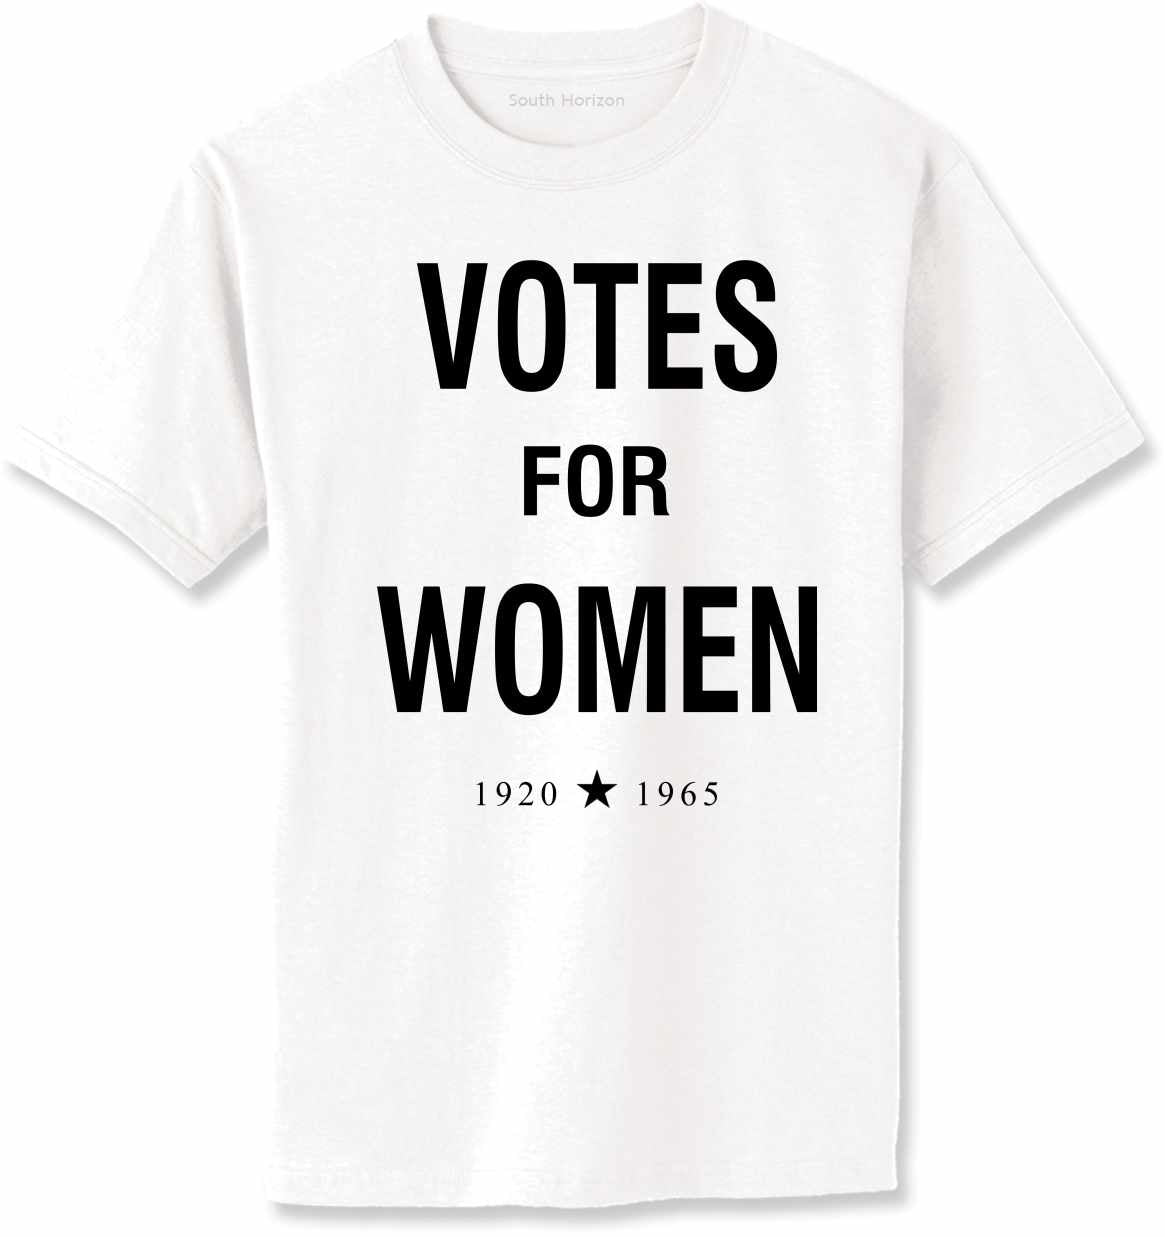 Votes For Women Adult T-Shirt (#994-1)